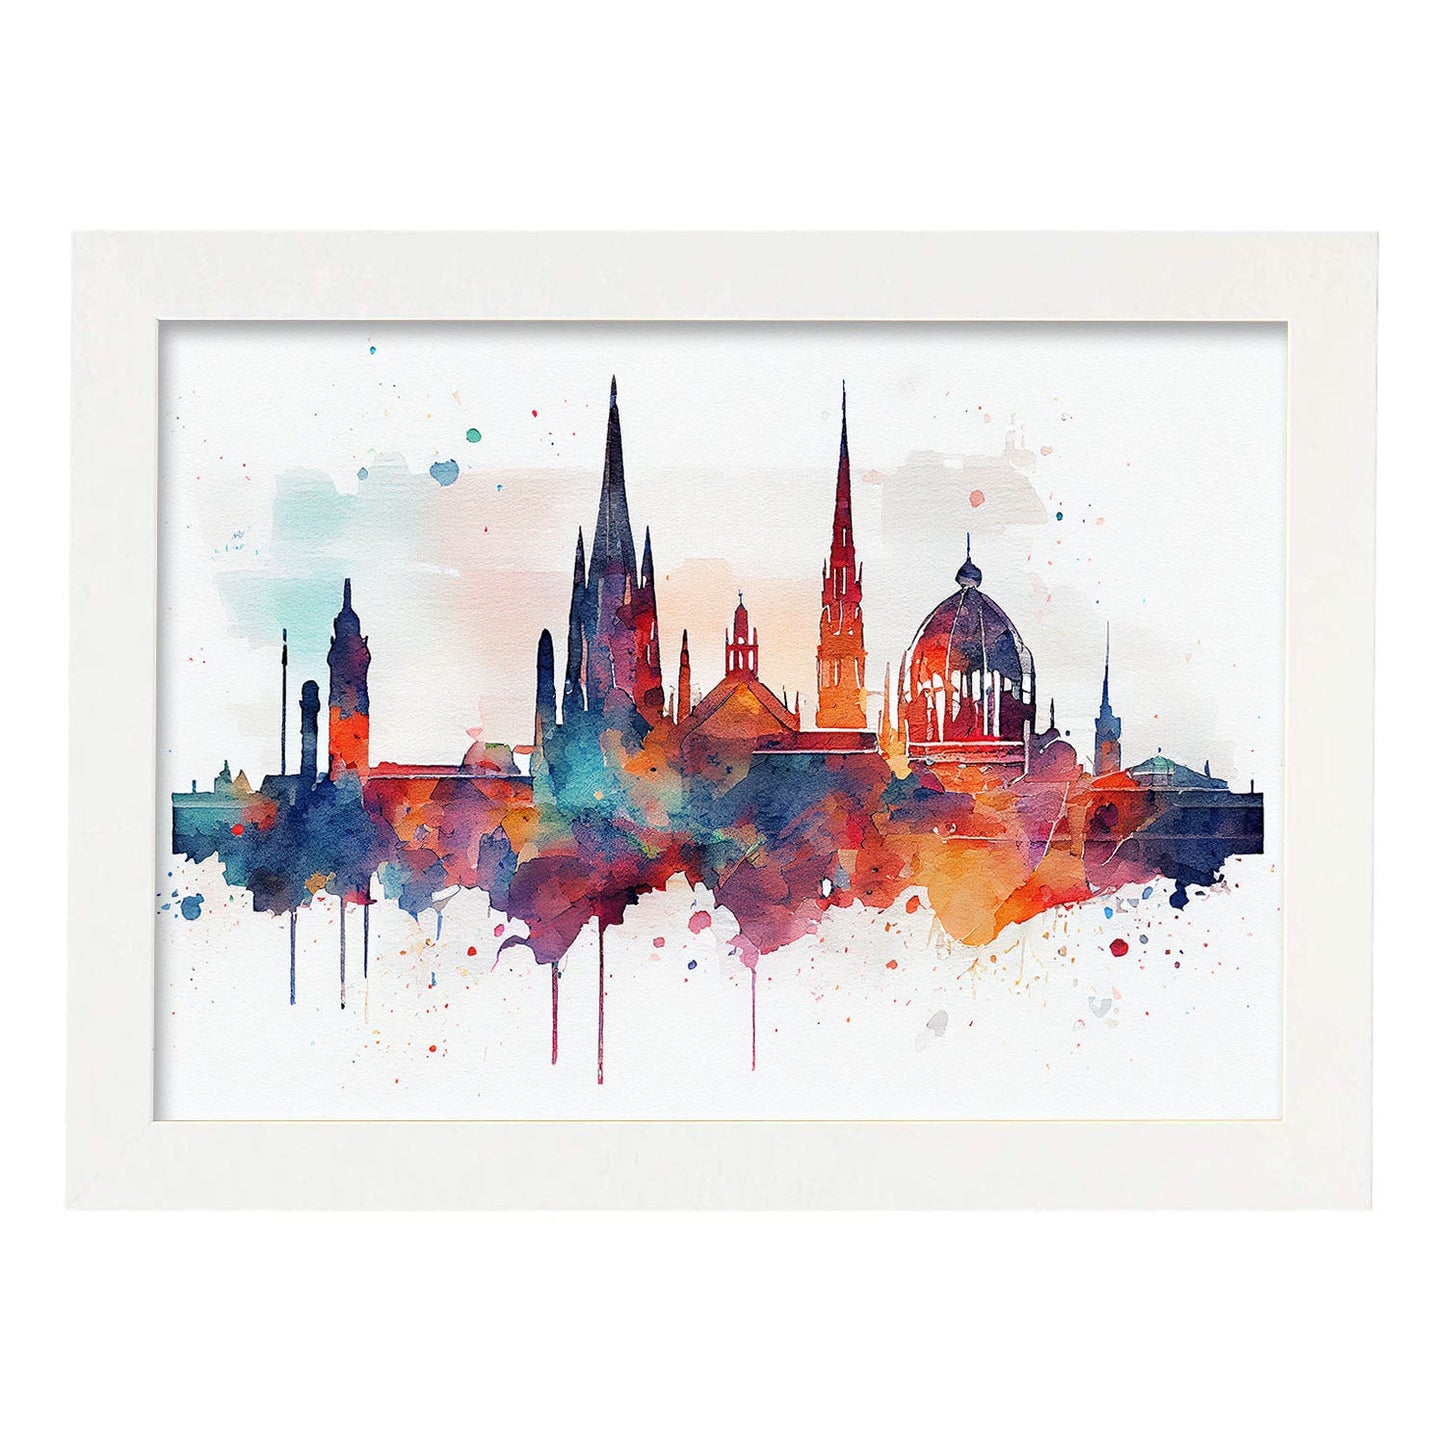 Nacnic watercolor of a skyline of the city of Vienna_2. Aesthetic Wall Art Prints for Bedroom or Living Room Design.-Artwork-Nacnic-A4-Marco Blanco-Nacnic Estudio SL